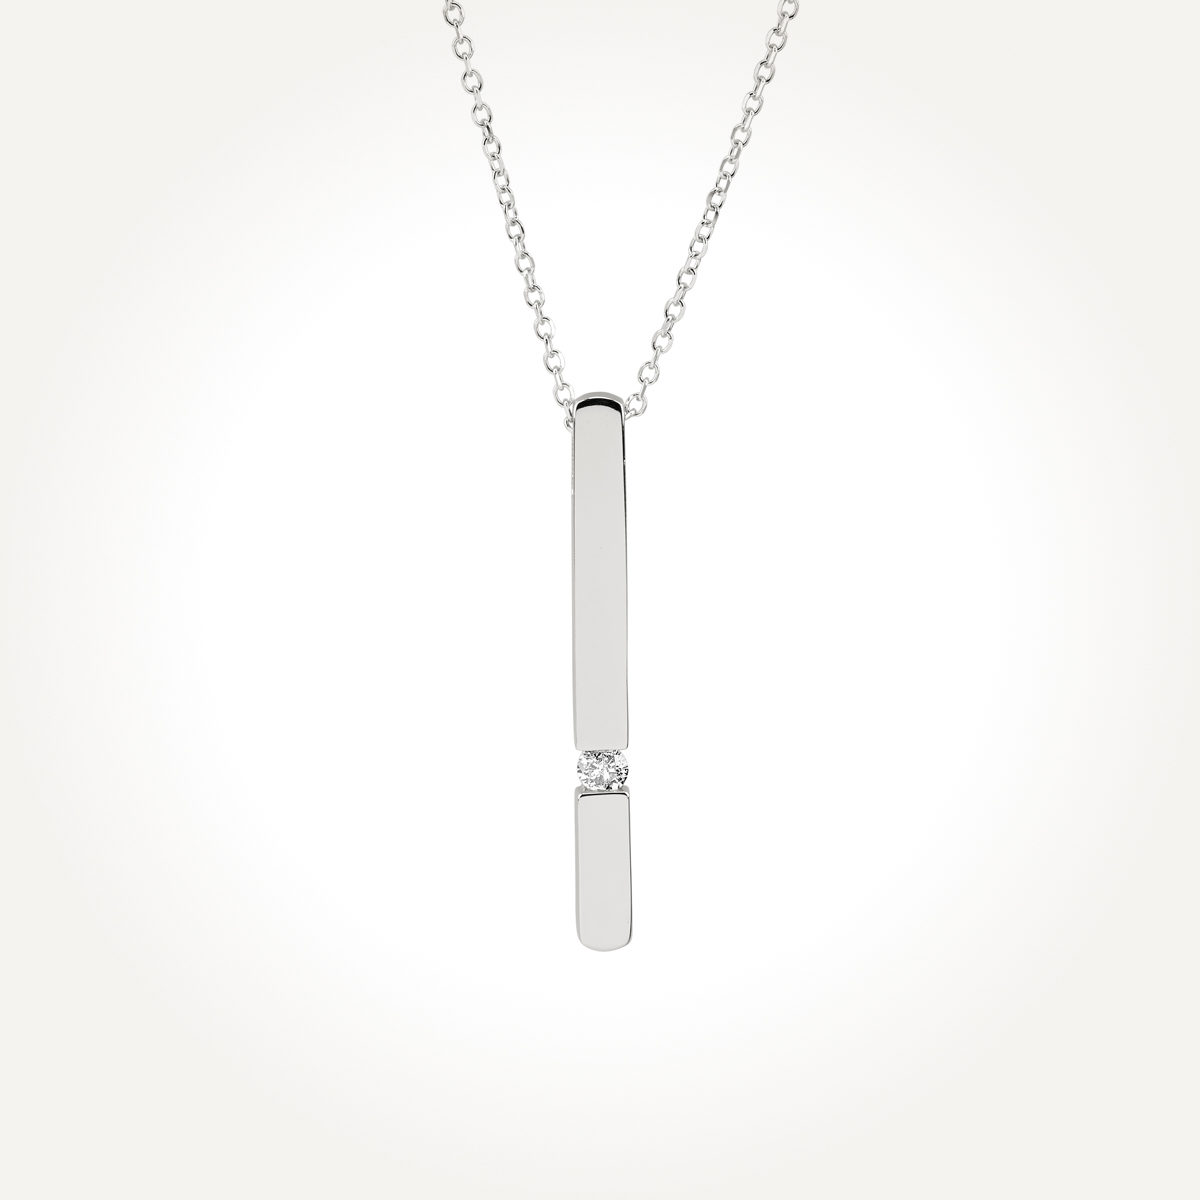 14KT White Gold Solitaire Vertical Bar Necklace